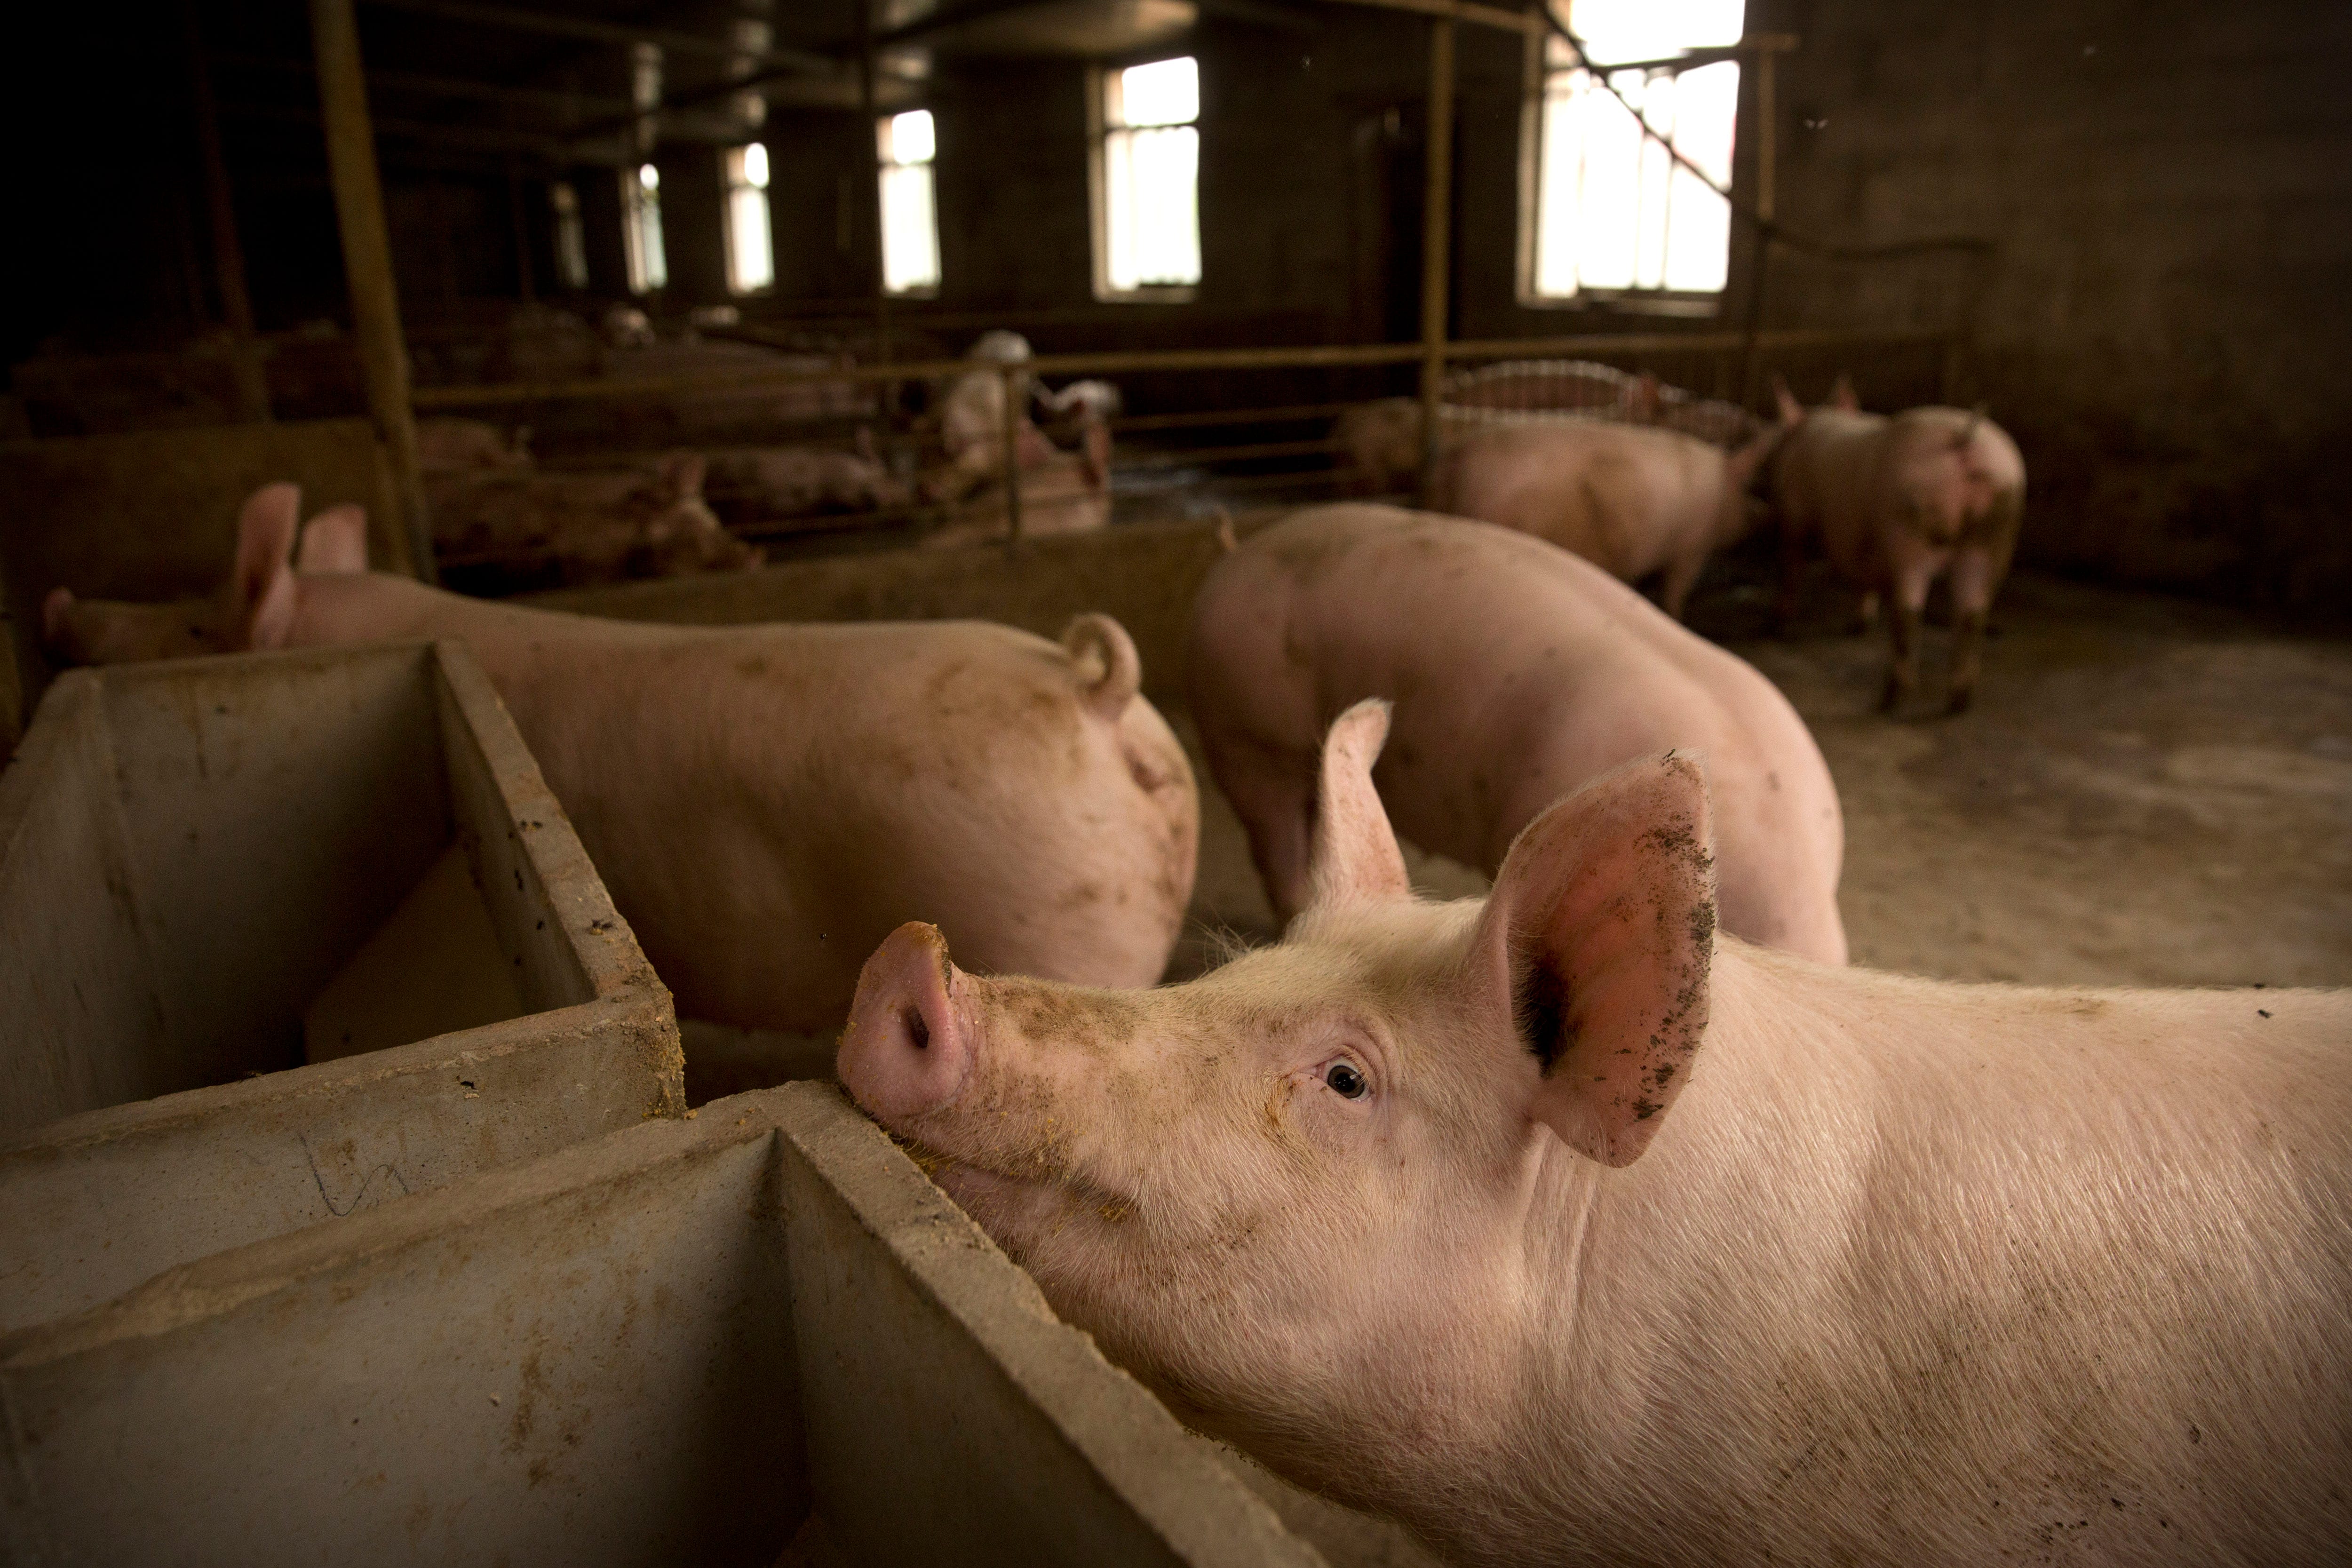 Pigs stand in a barn at a pig farm May 8 in Panggezhuang village in northern China's Hebei province. Pork lovers worldwide are wincing at prices that have jumped by up to 40 percent as China's struggle to stamp out African swine fever in its vast pig herds sends shockwaves through global meat markets.